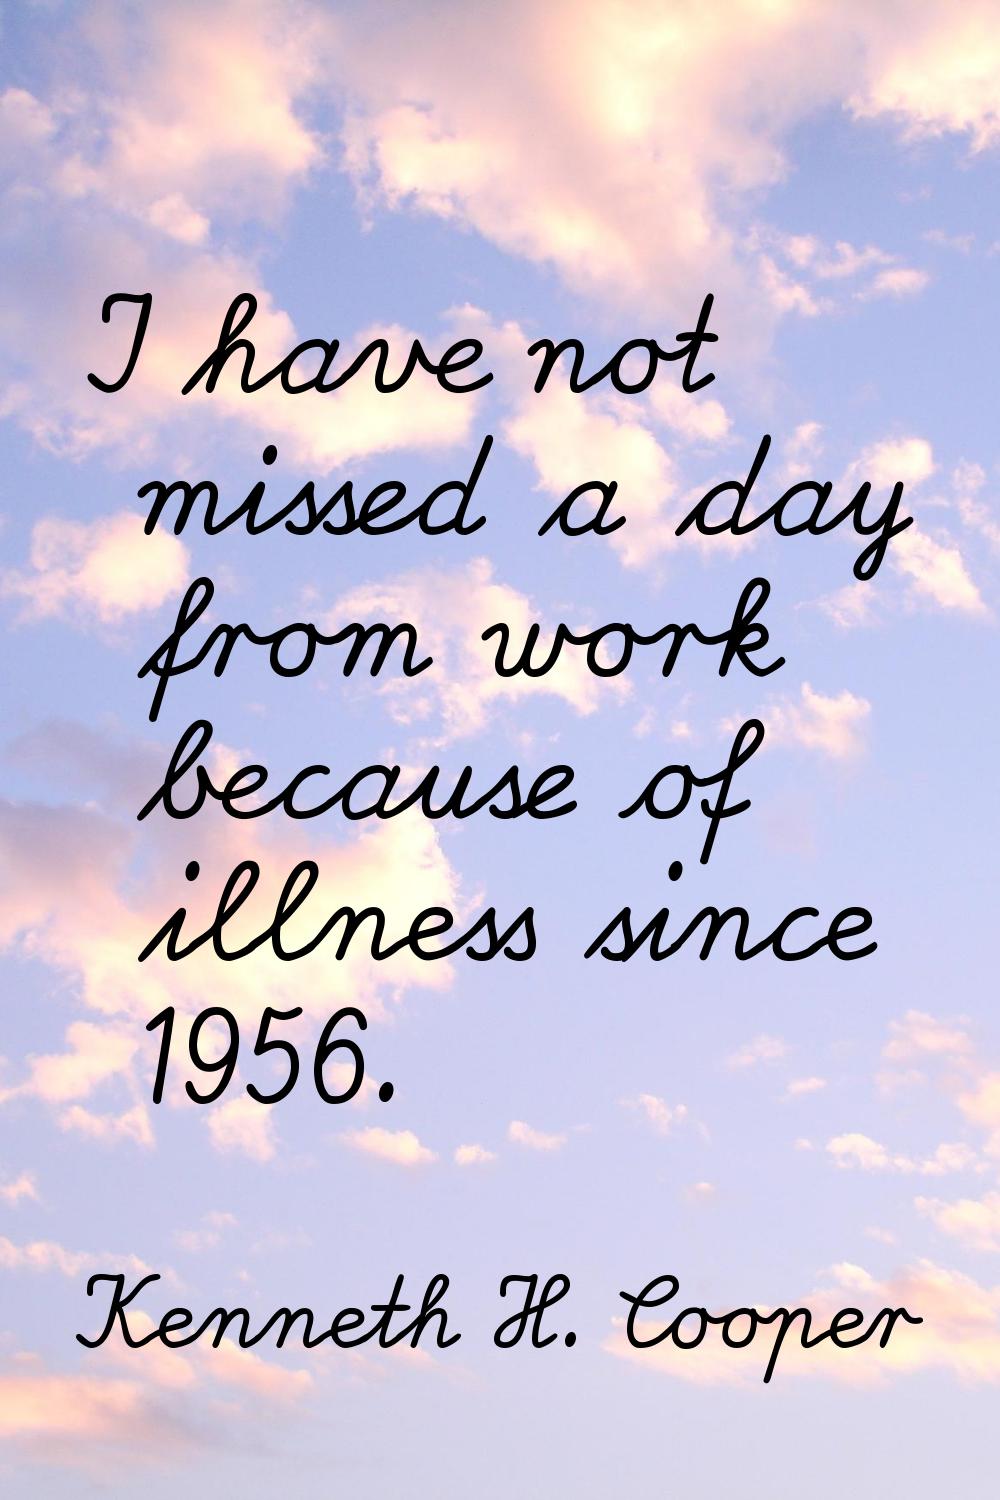 I have not missed a day from work because of illness since 1956.